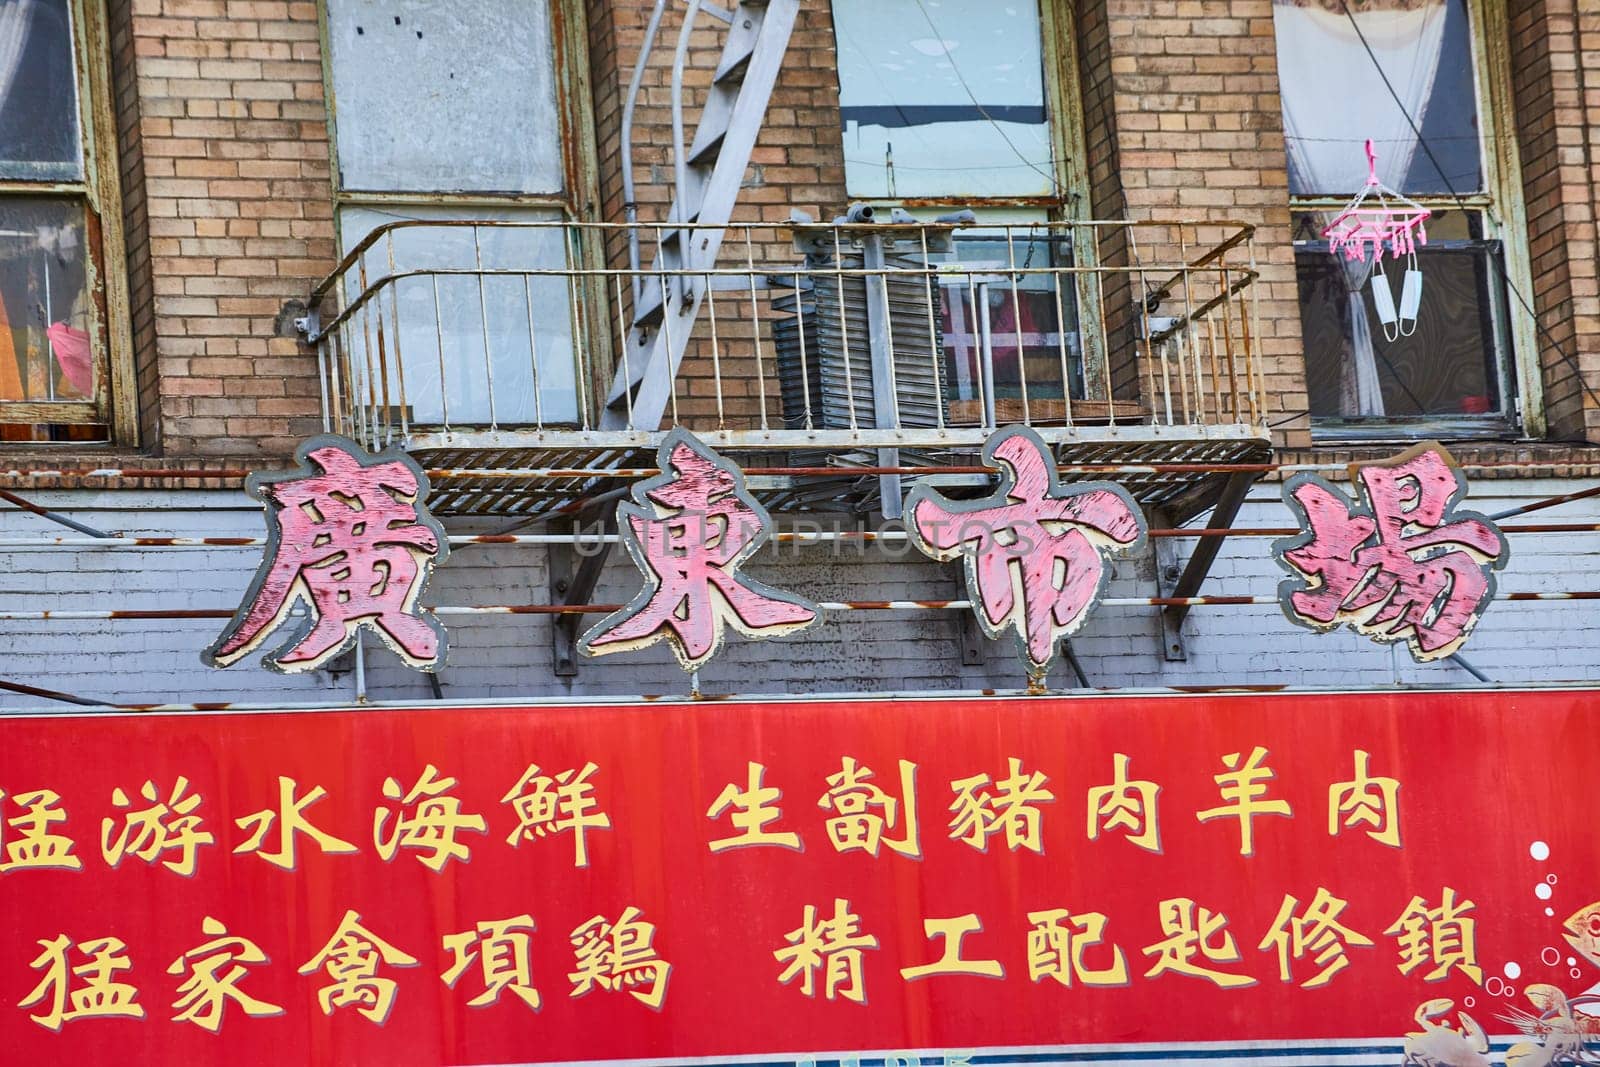 Image of Chinese sign below worn down fire escape with red banner in Chinatown